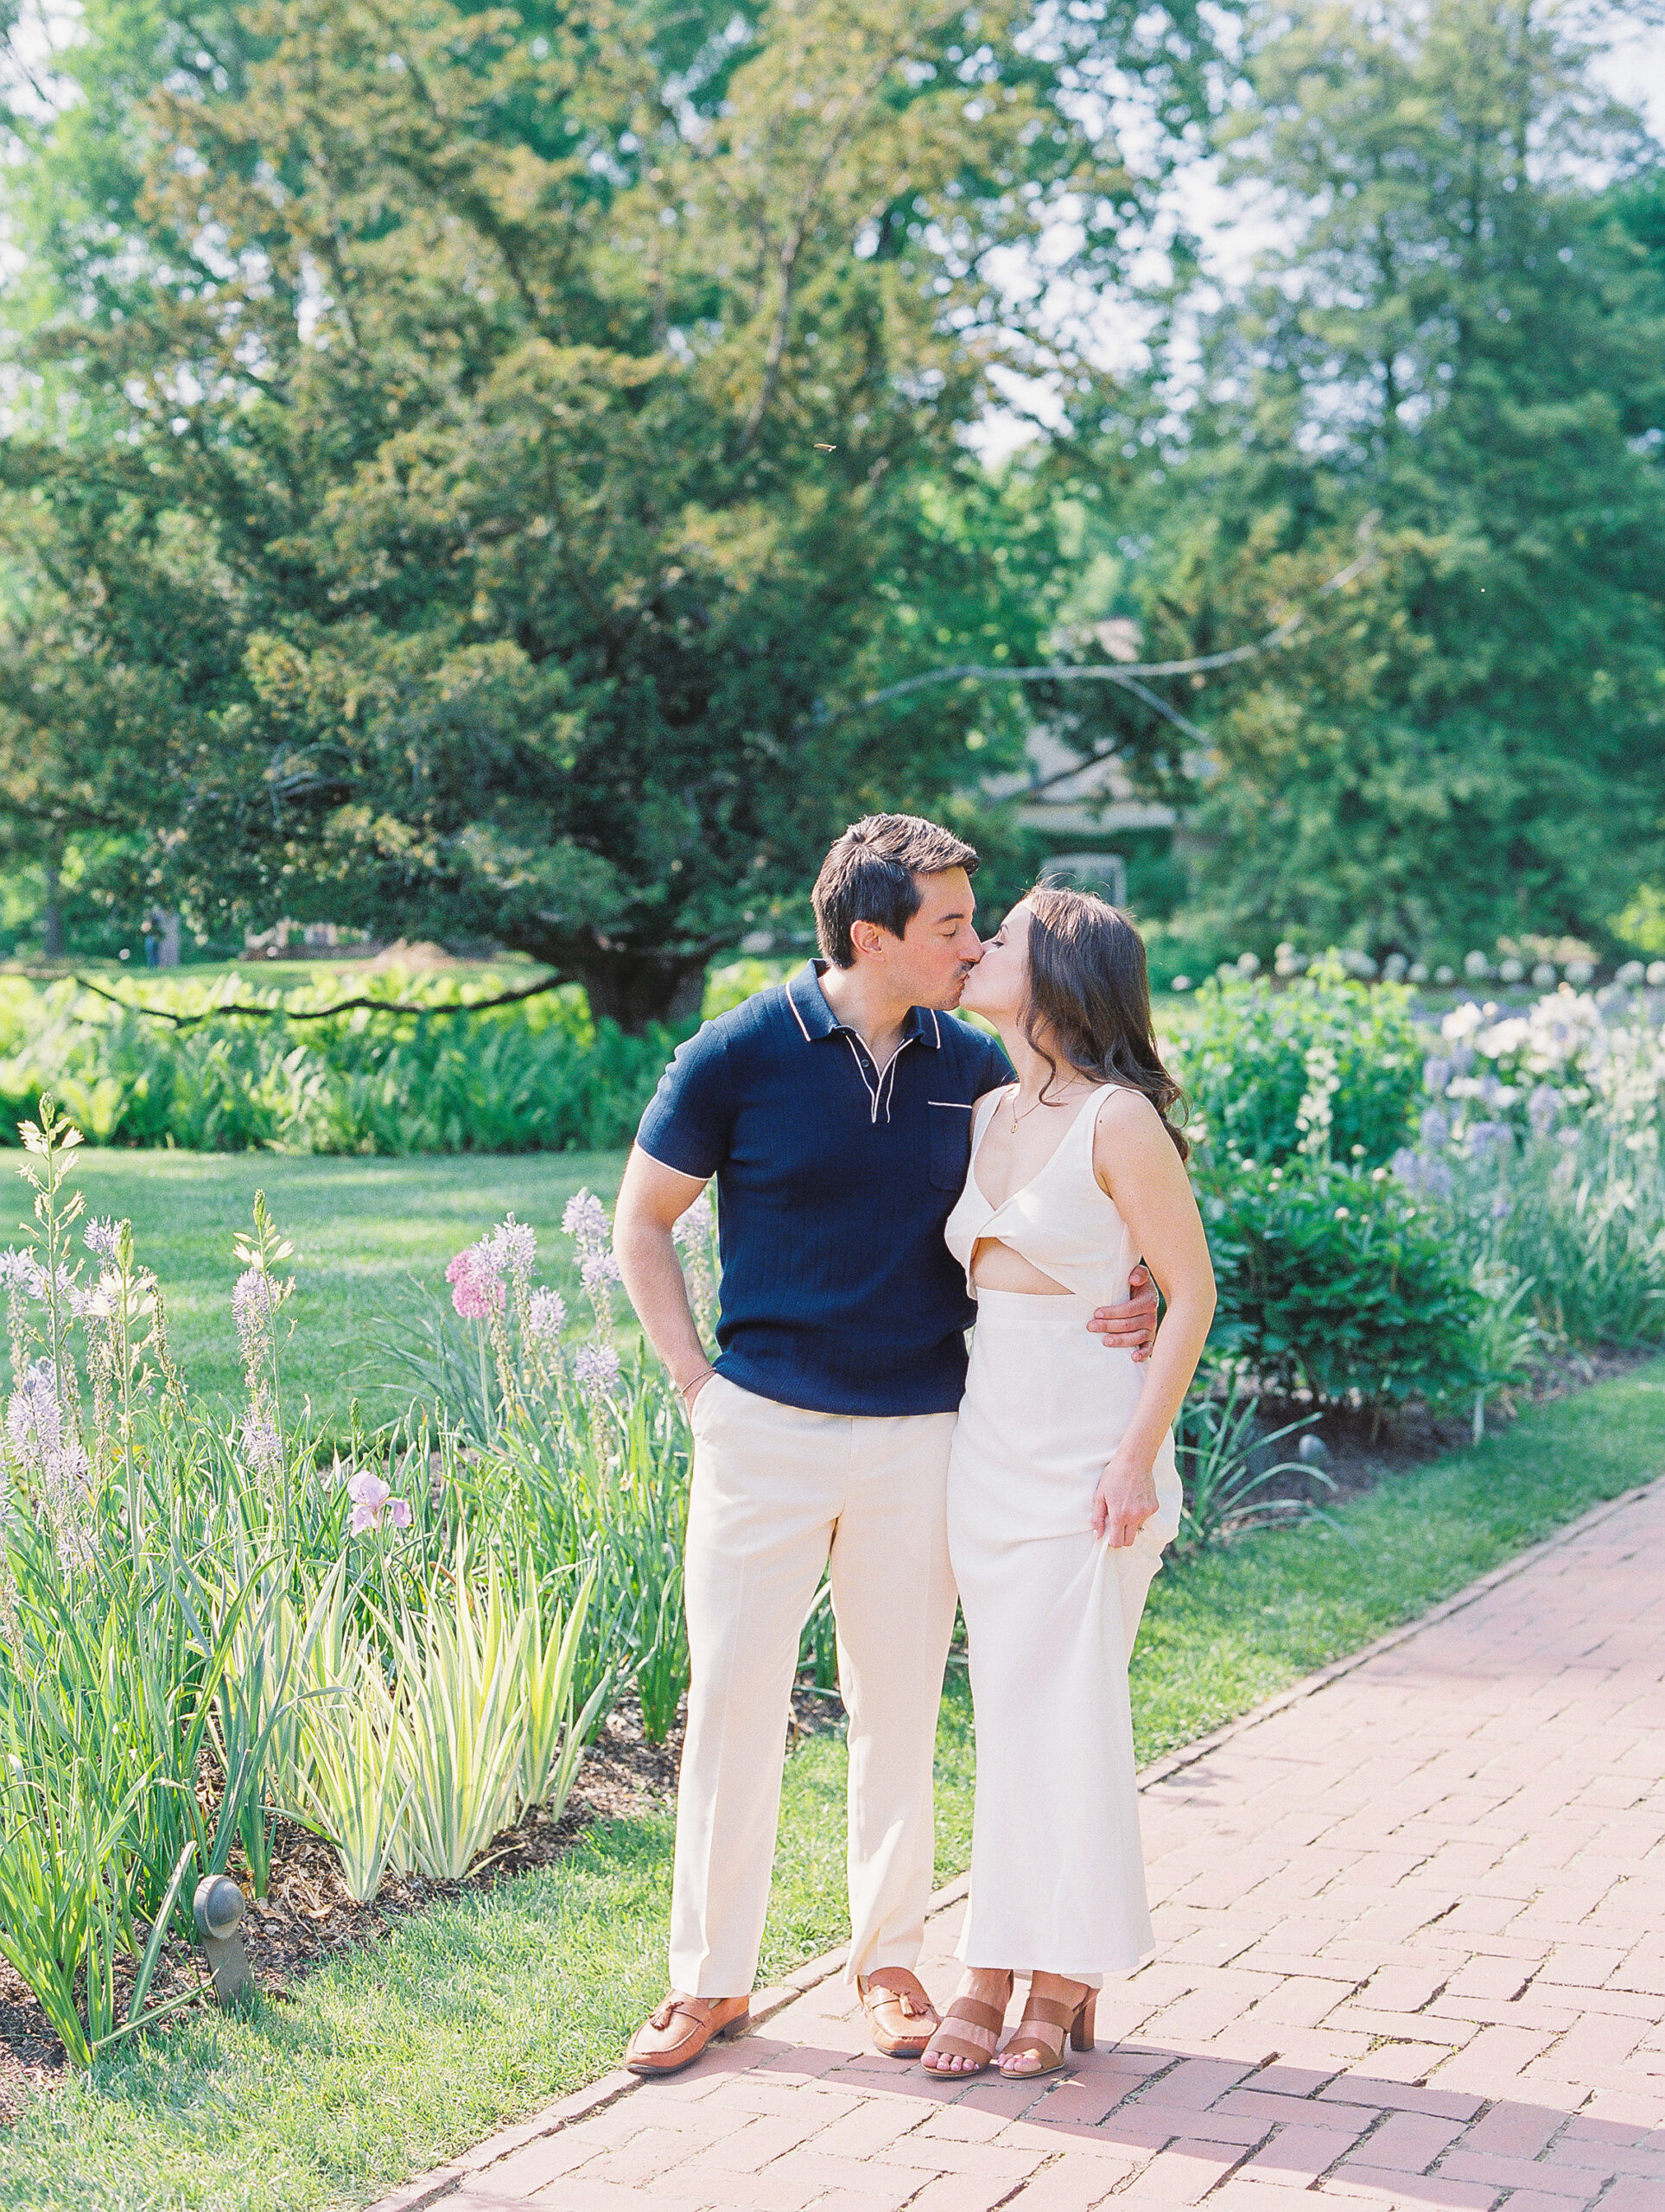 Spring Longwood Gardens Engagement Session shot on film by destination wedding photographer Katie Trauffer - couple kisses in front of manicured garden